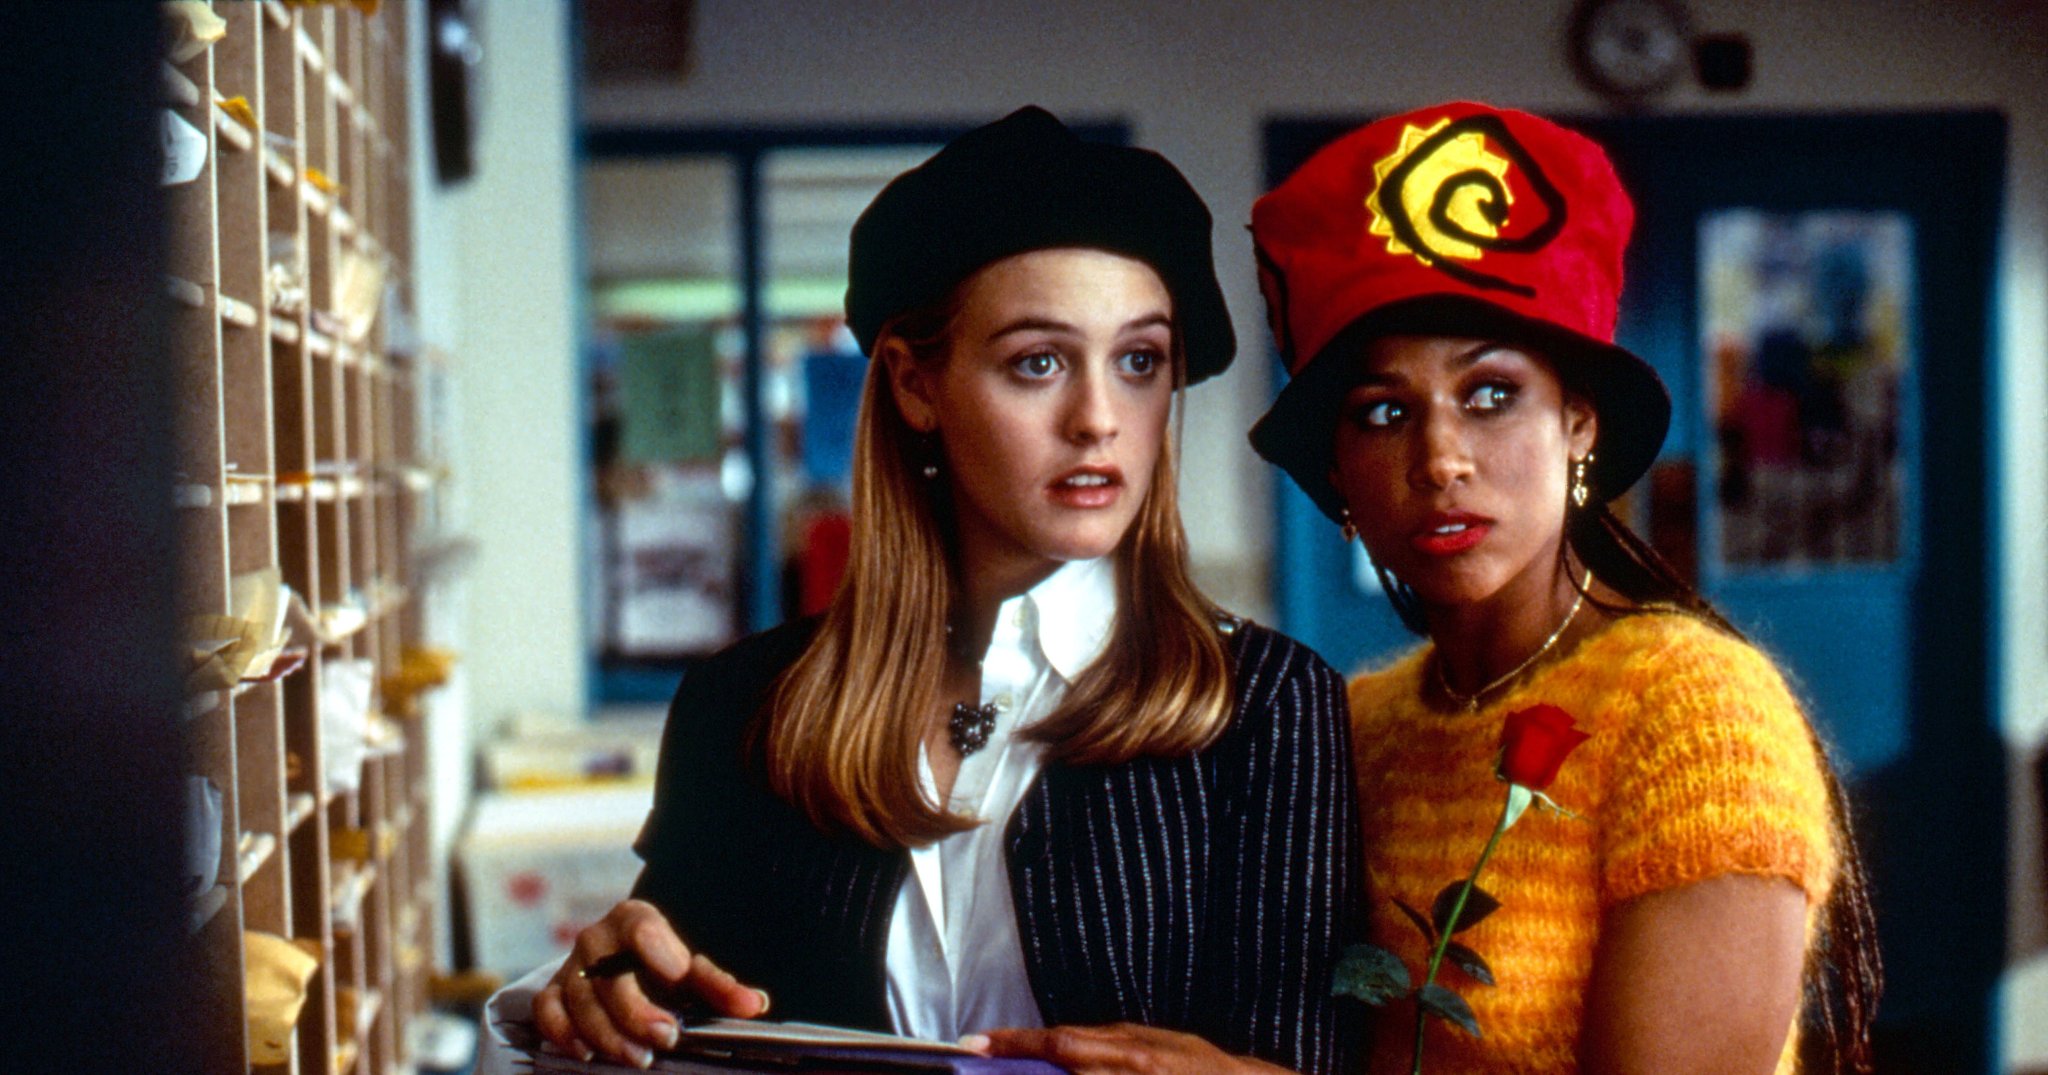 The Best Duo Halloween Costumes Based on Iconic Characters